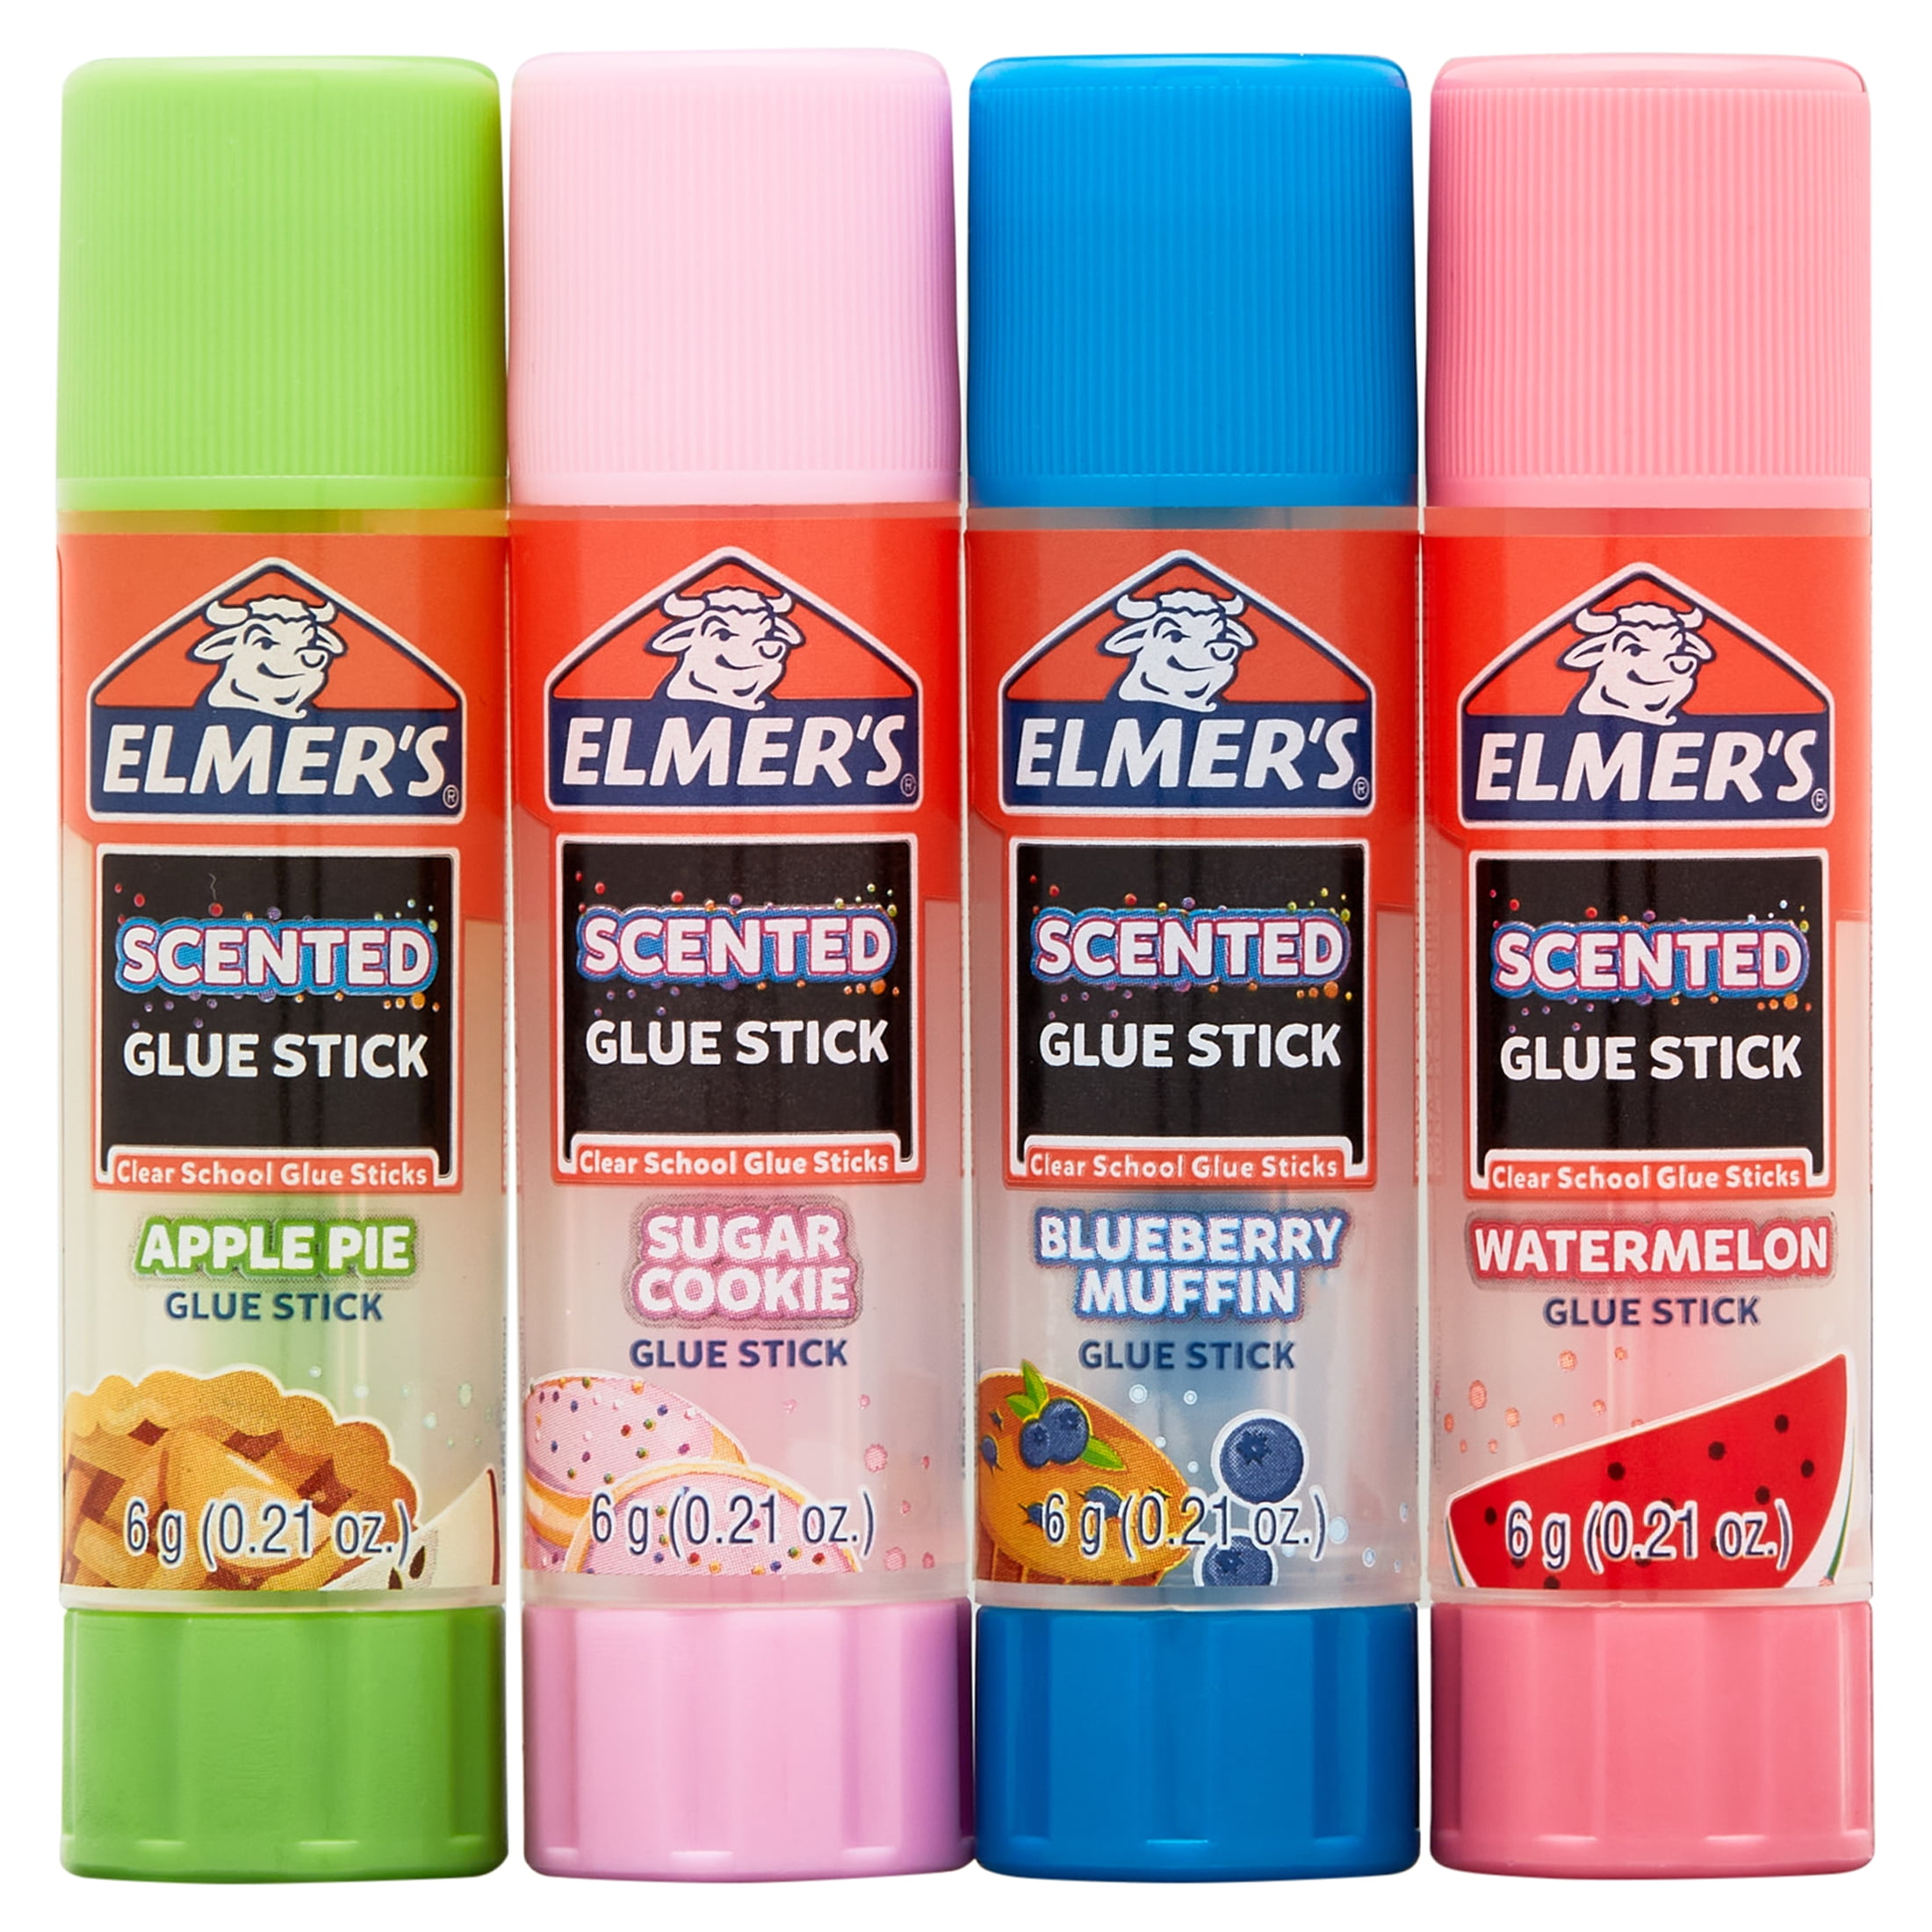 Elmer's Total 9-Sticks, 3-Pack Scented Notoxic Glue Sticks for Kids School  Projects Variety Pack (Apple Pie, Mango Pineapple, Watermelon), 0.77 oz